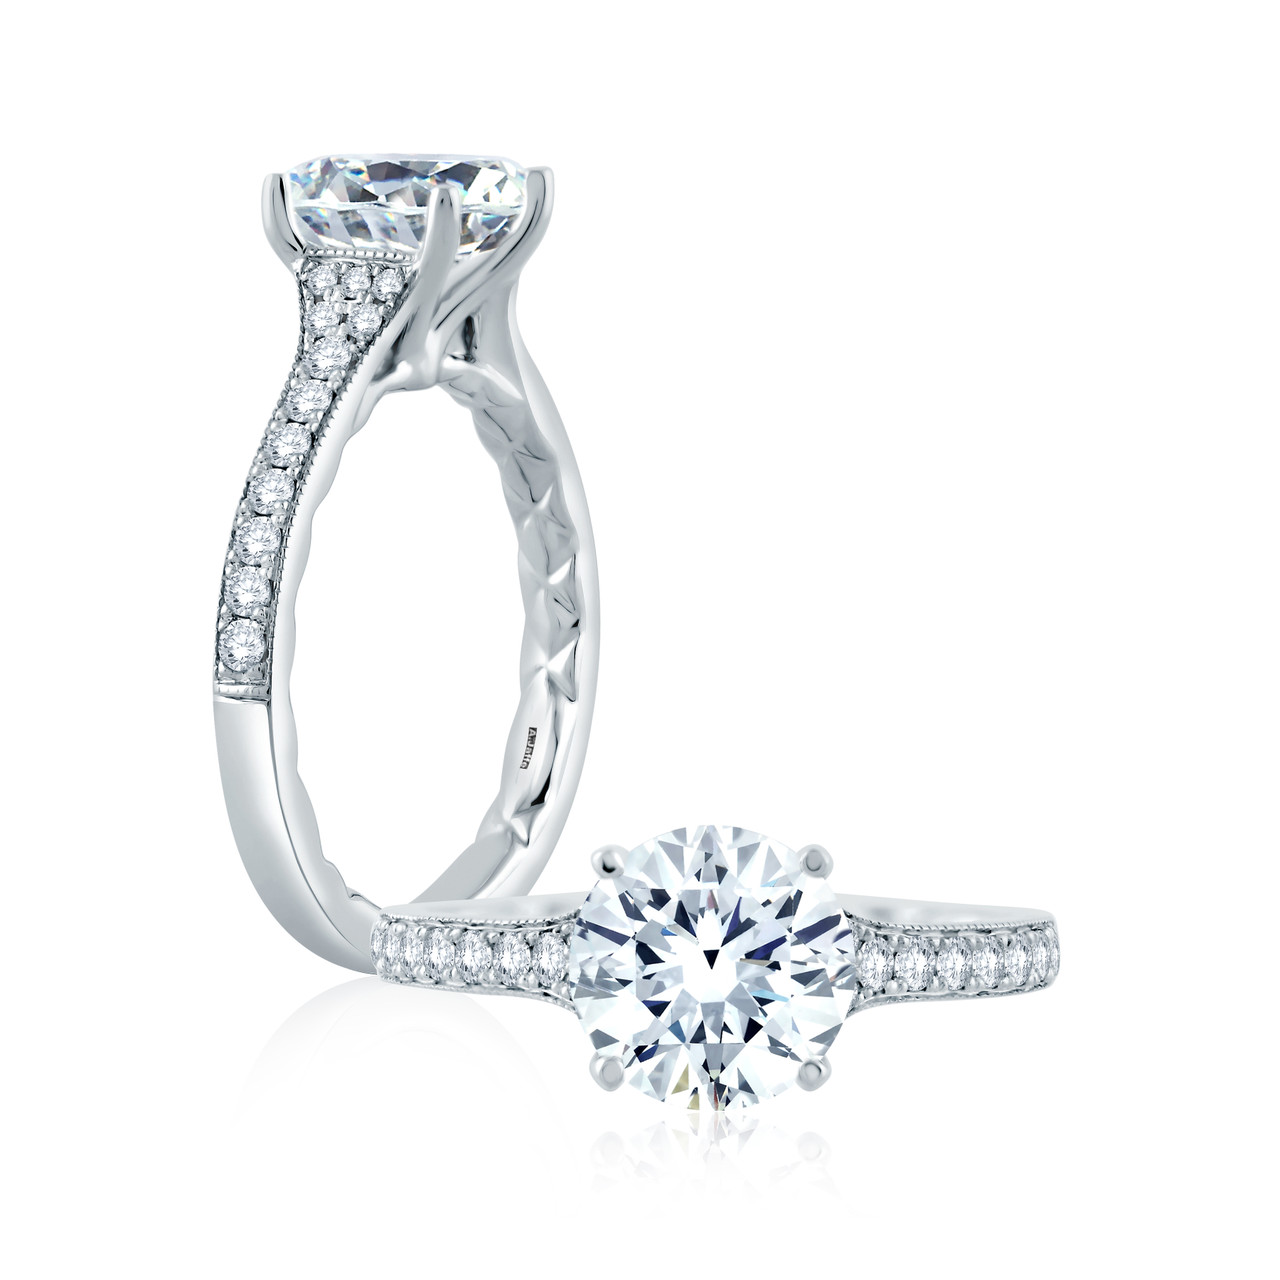 A.JAFFE Classics Engagement Ring MECRD2351Q/199 | Exclusively Diamonds